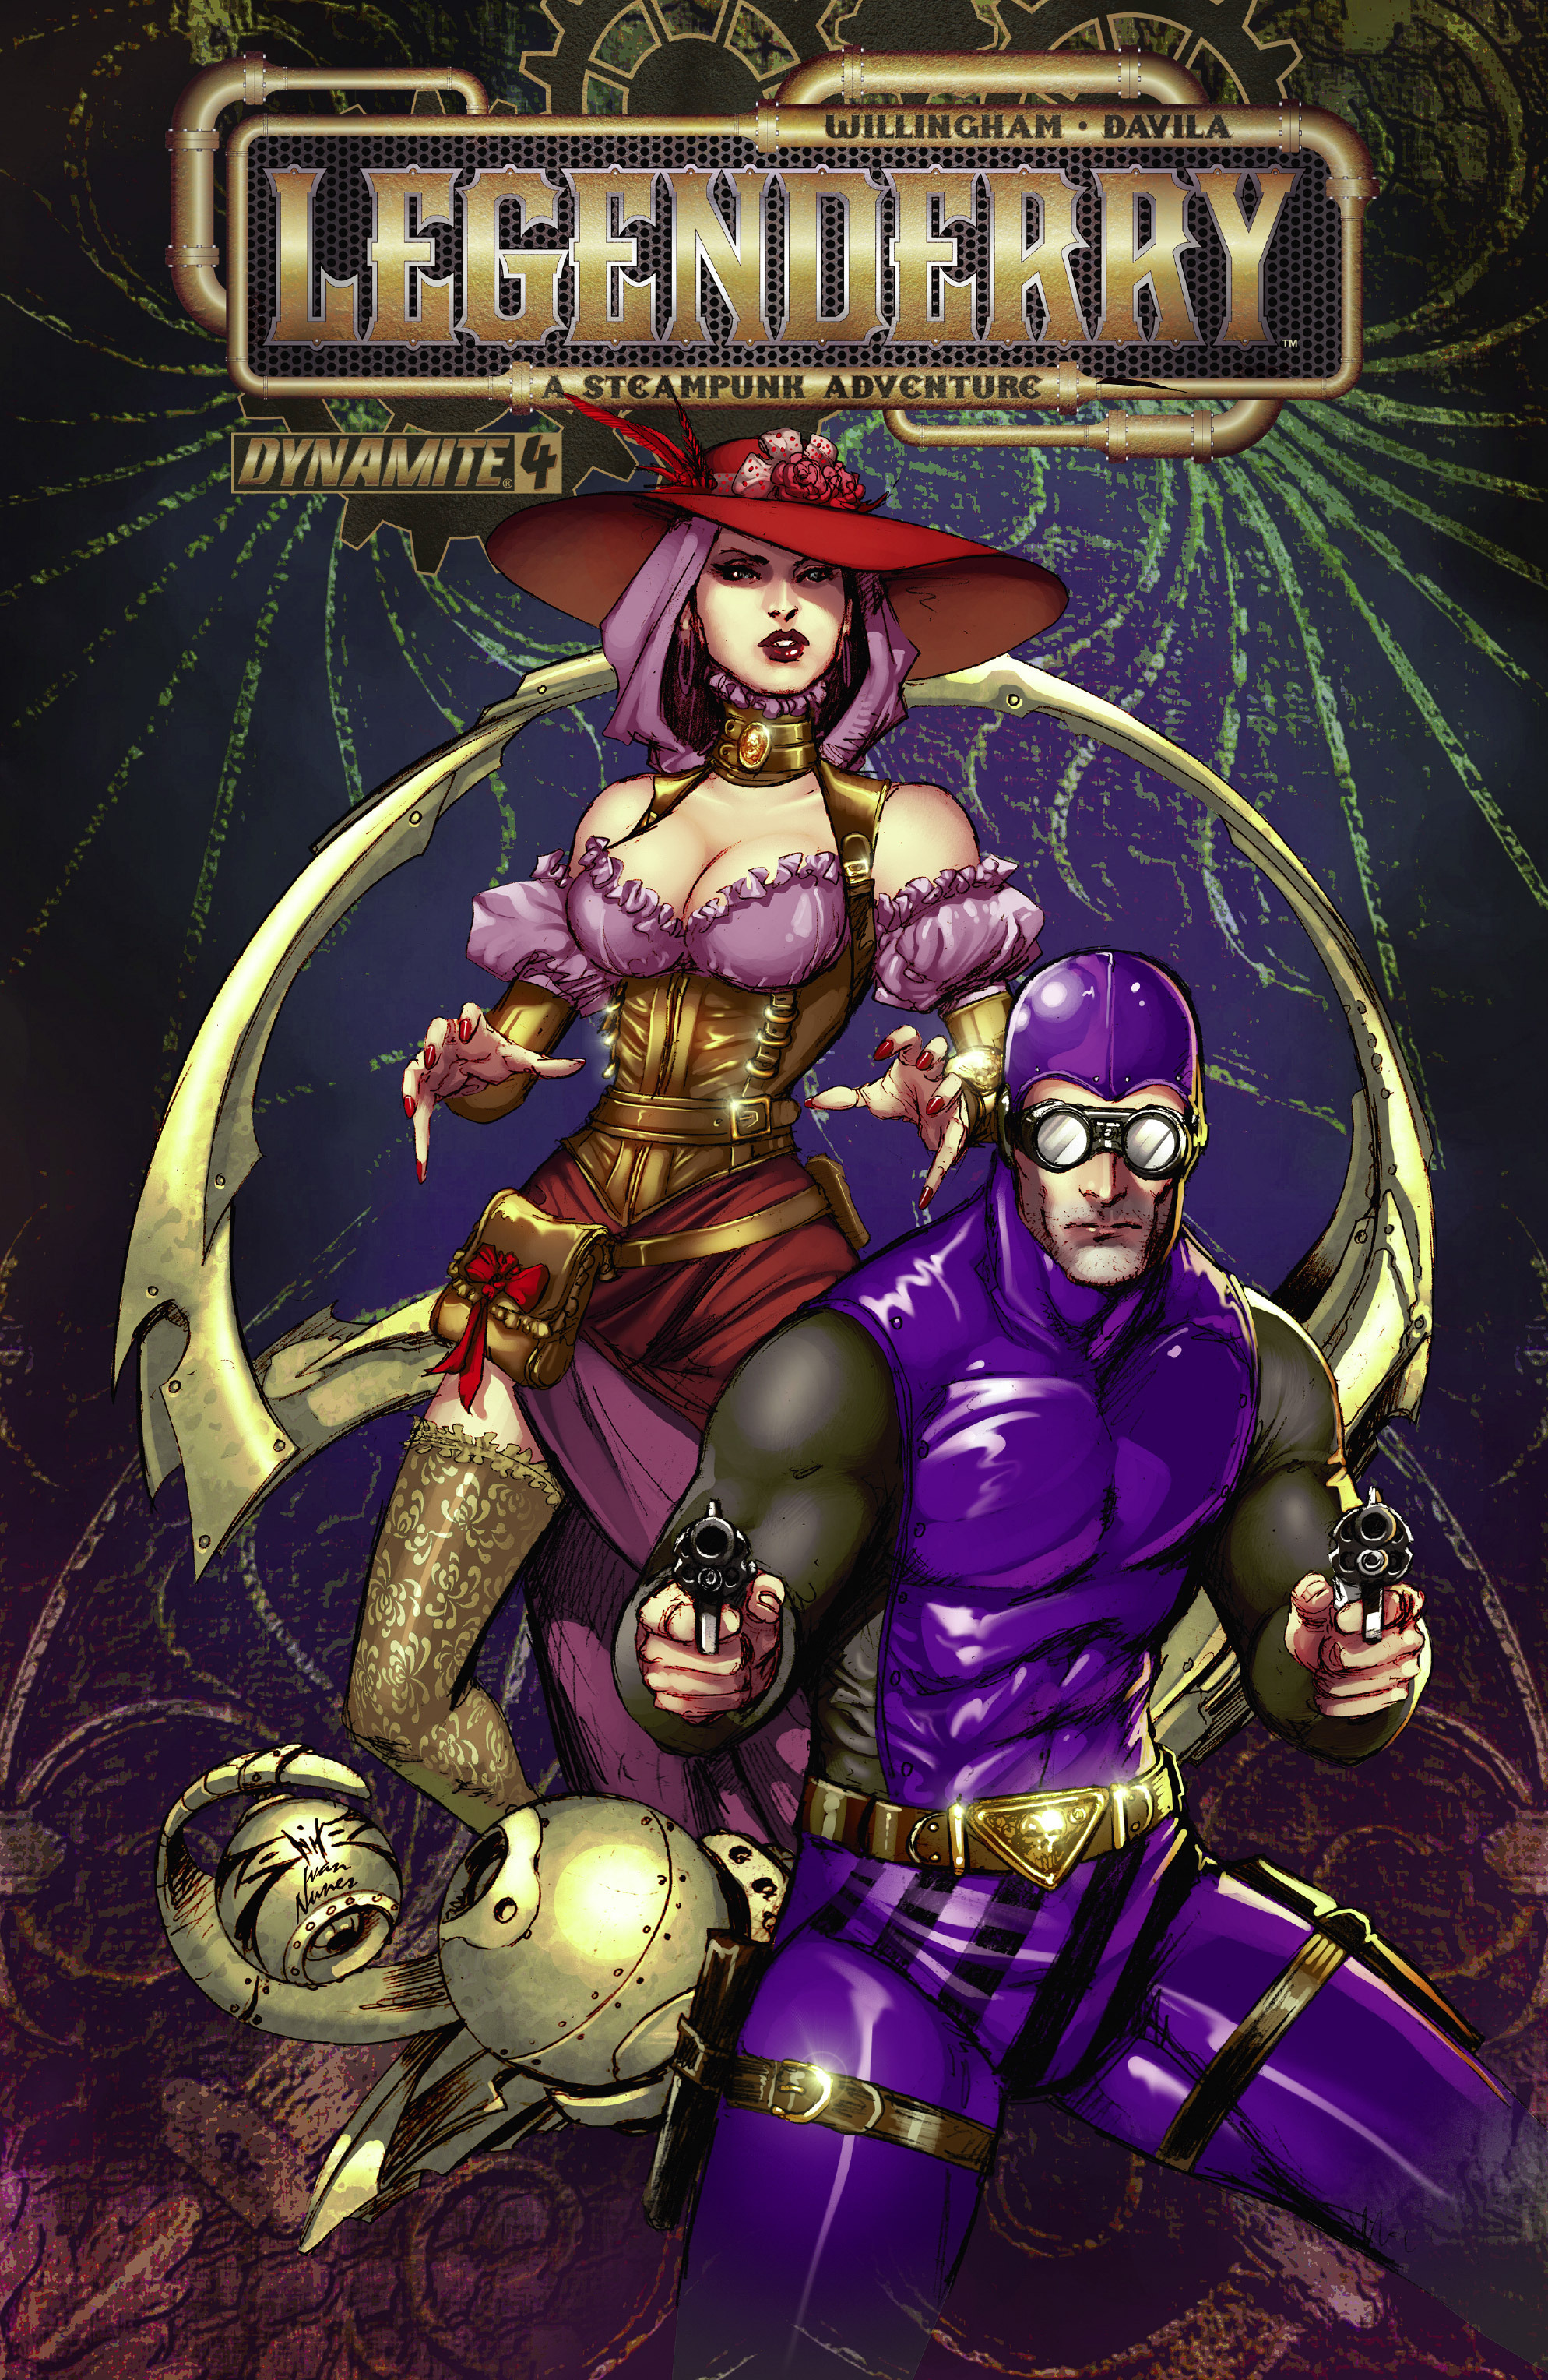 Read online Legenderry: A Steampunk Adventure comic -  Issue #4 - 1